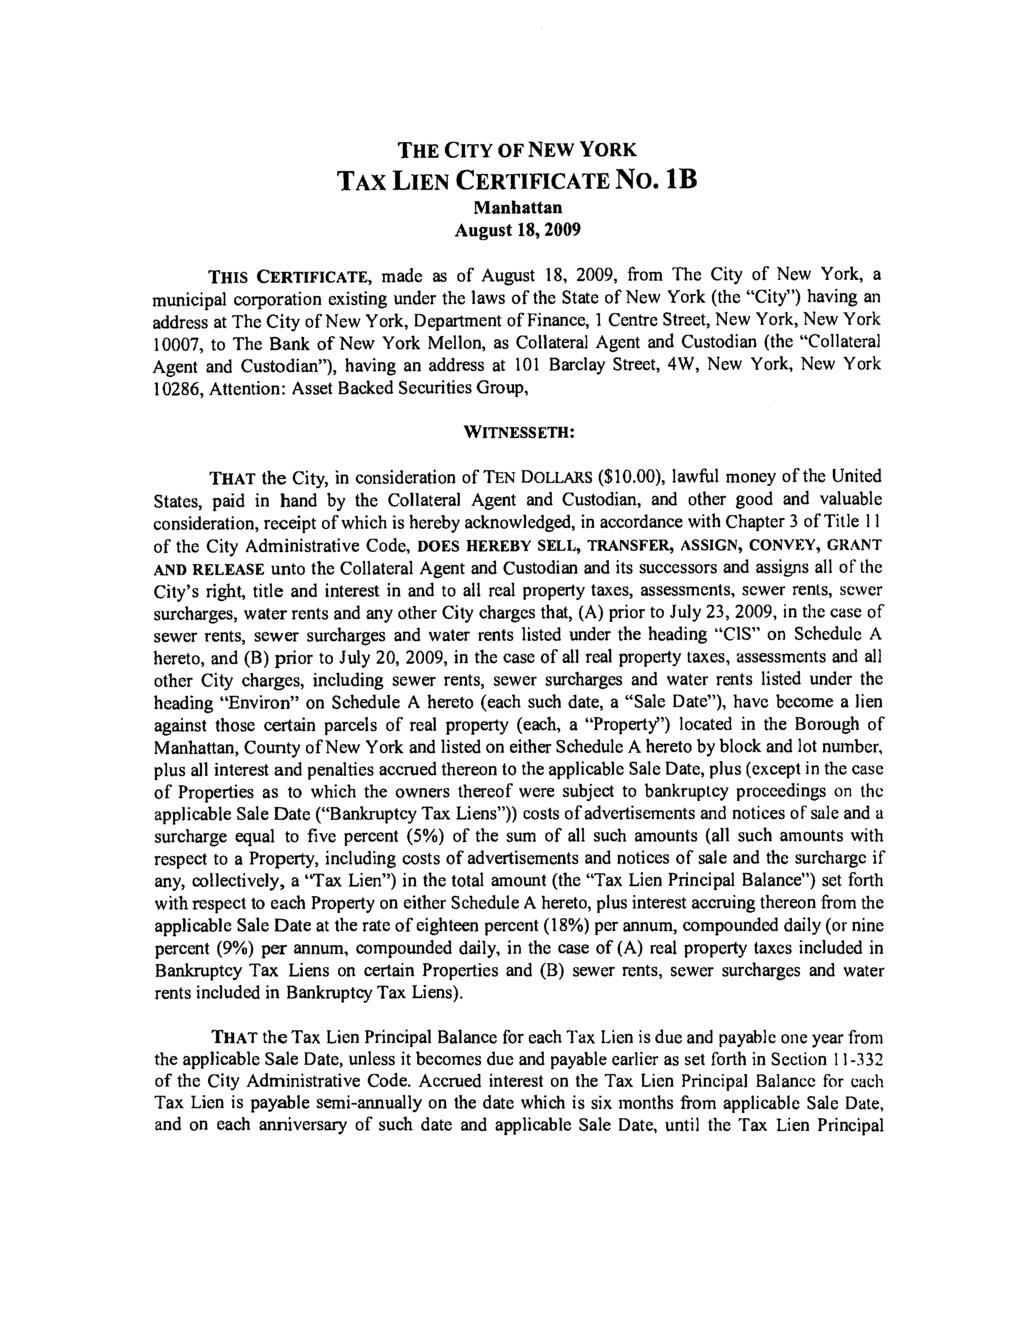 THE CITY OF NEW YORK TAX LIEN CERTIFICATE NO.